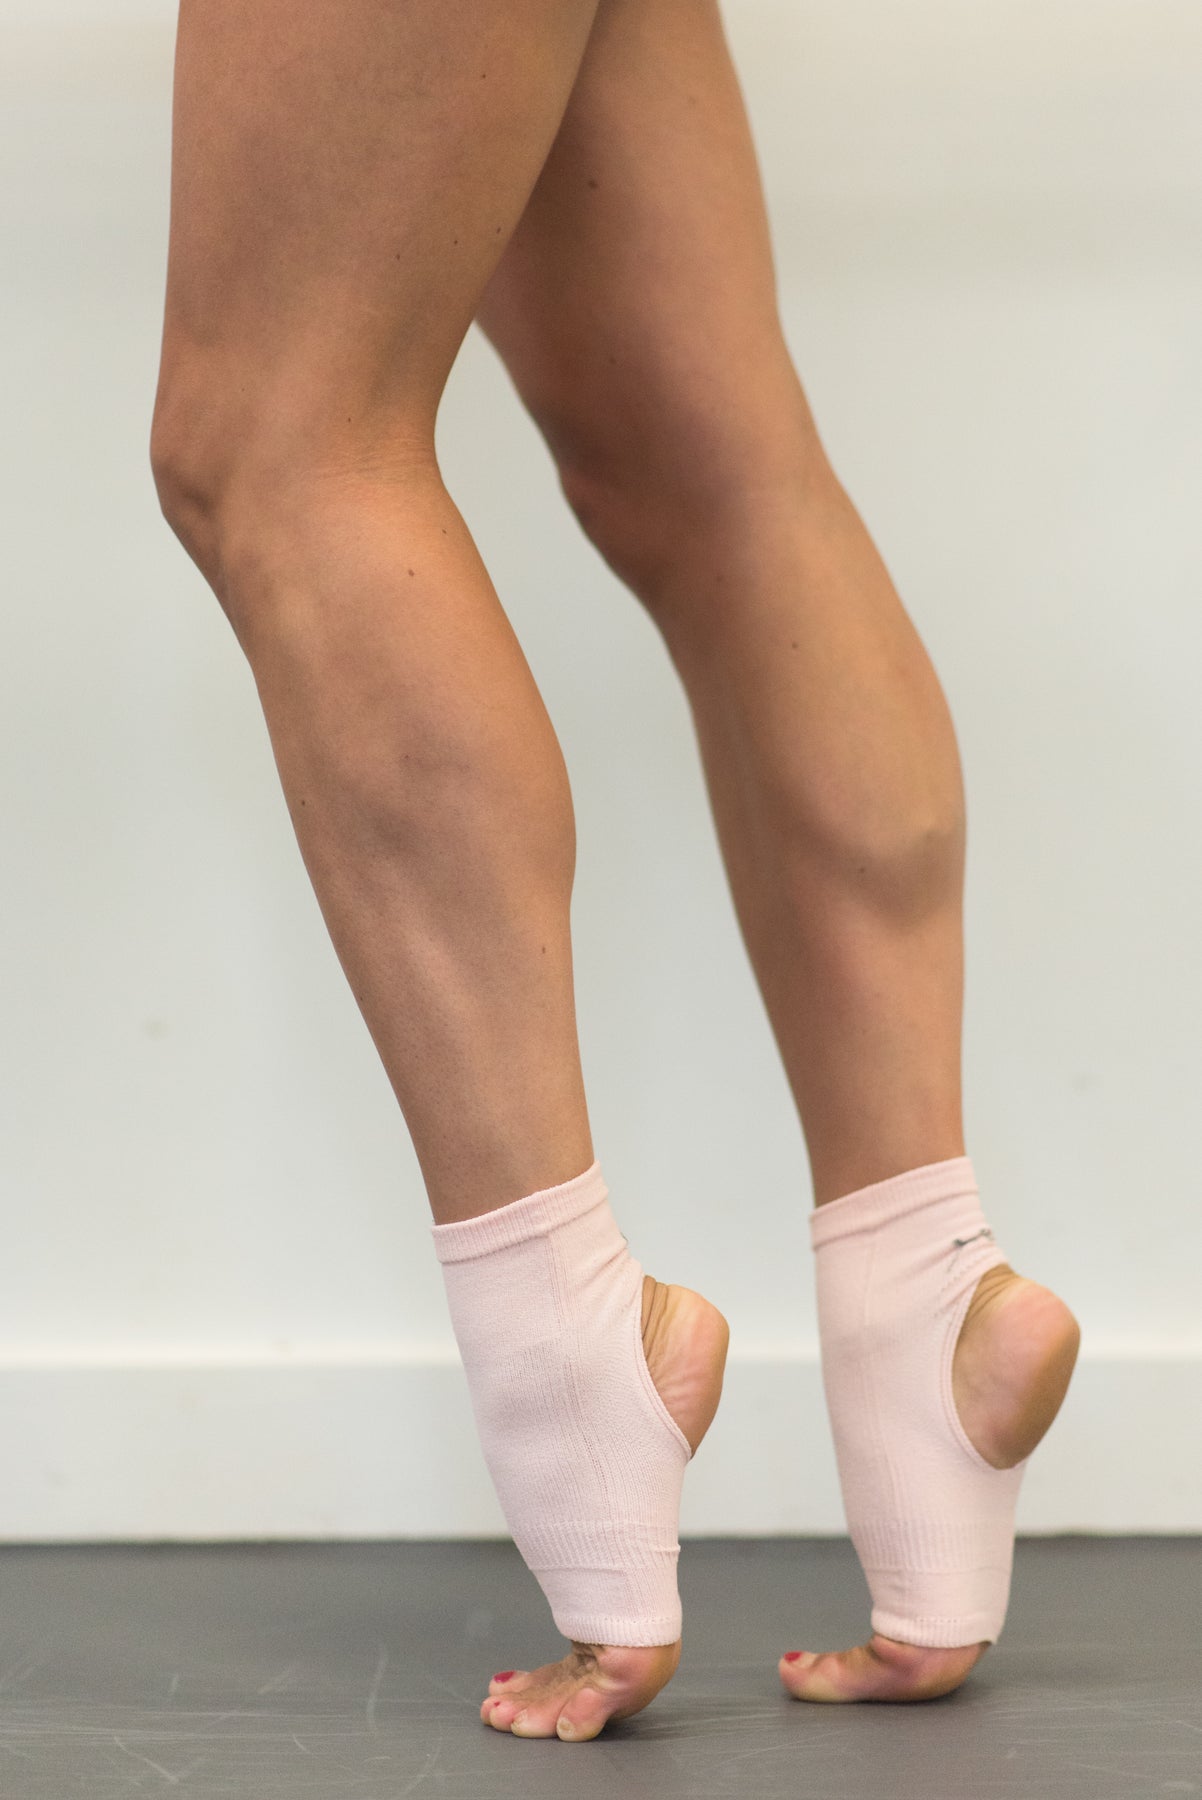 The Apolla Joule socks are must haves for any dancer